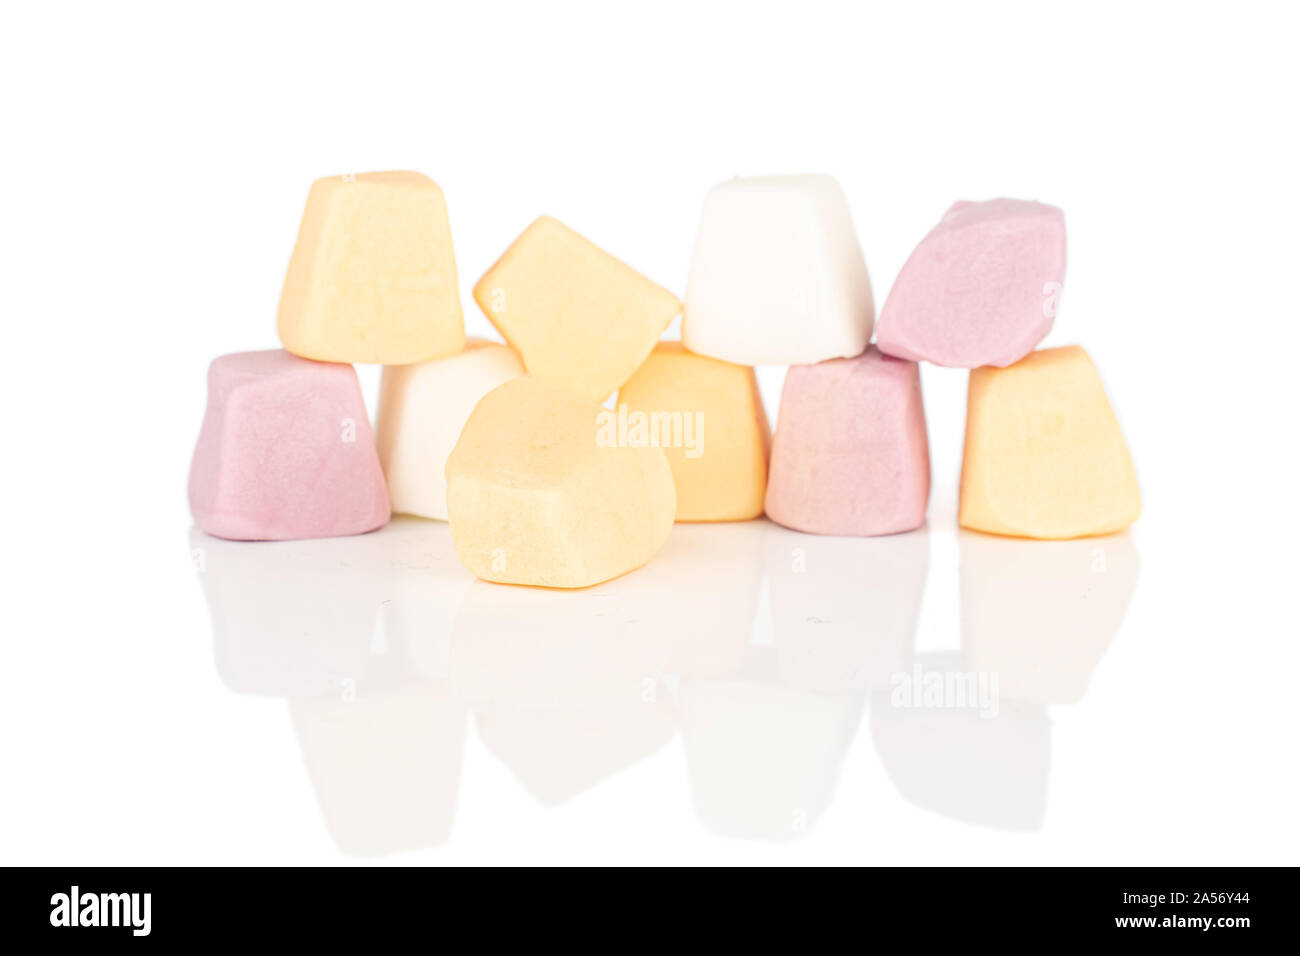 Lot of whole soft pastel candy wall isolated on white background Stock Photo